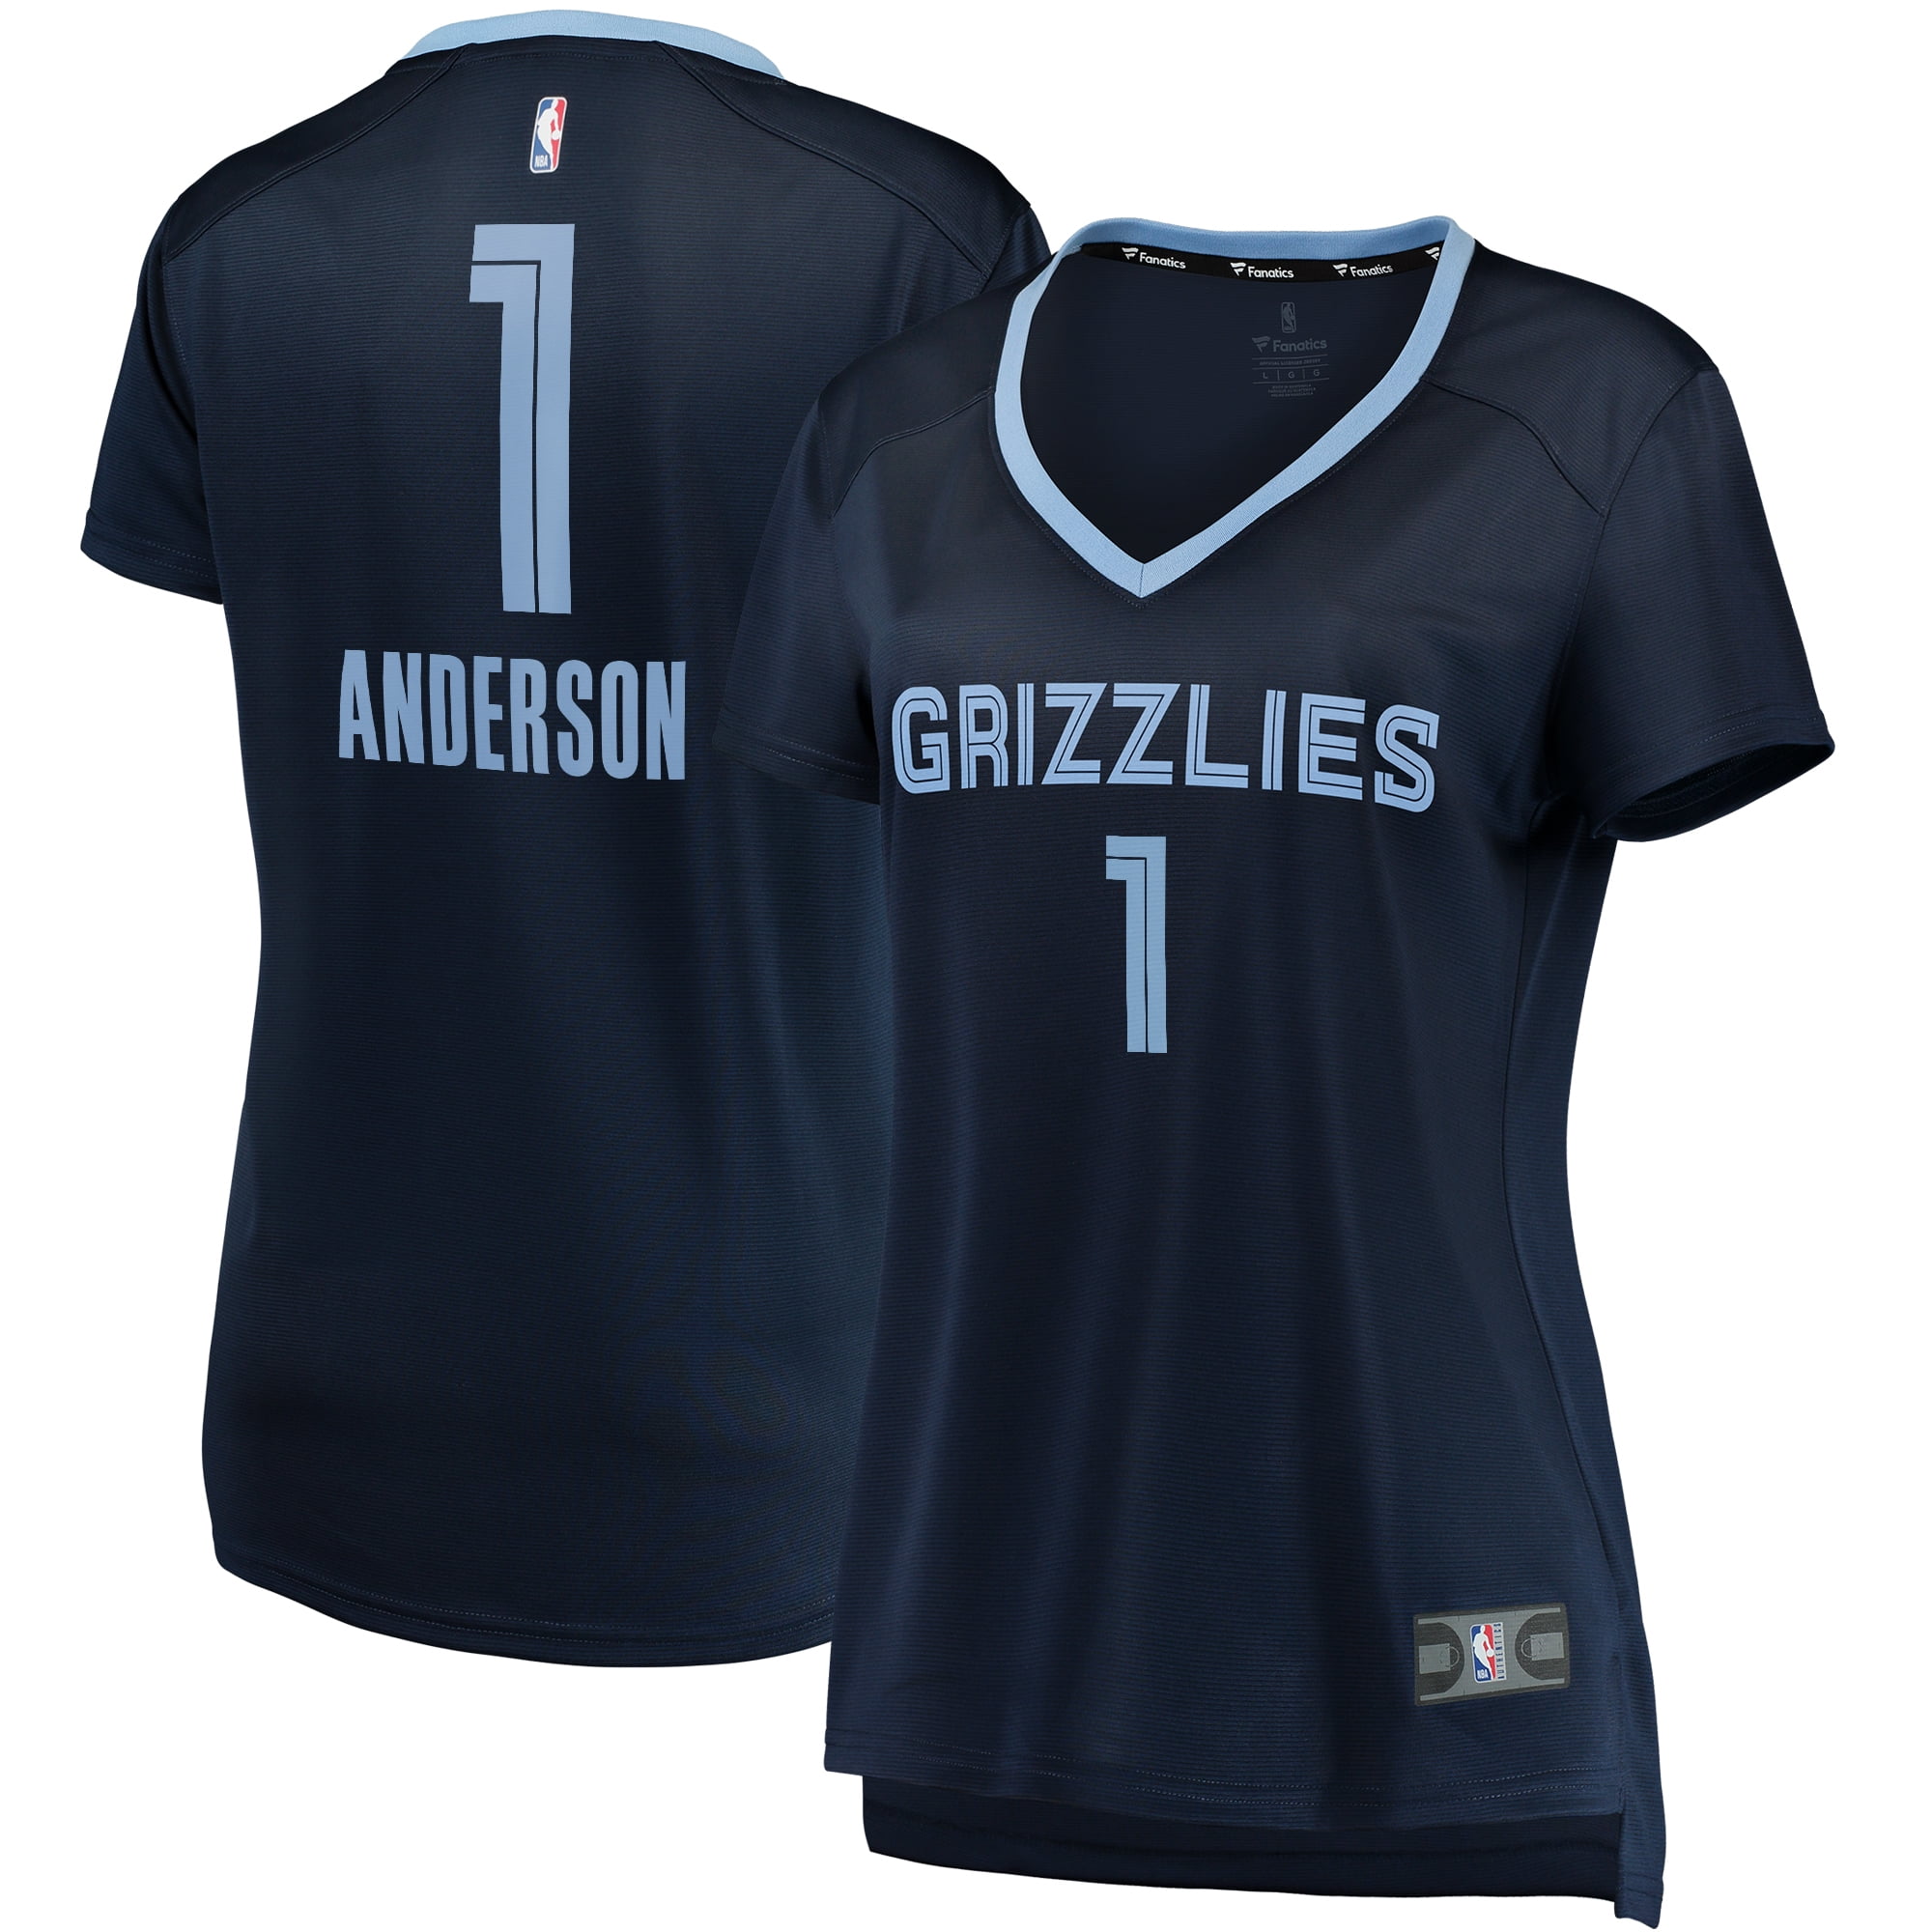 kyle anderson jersey